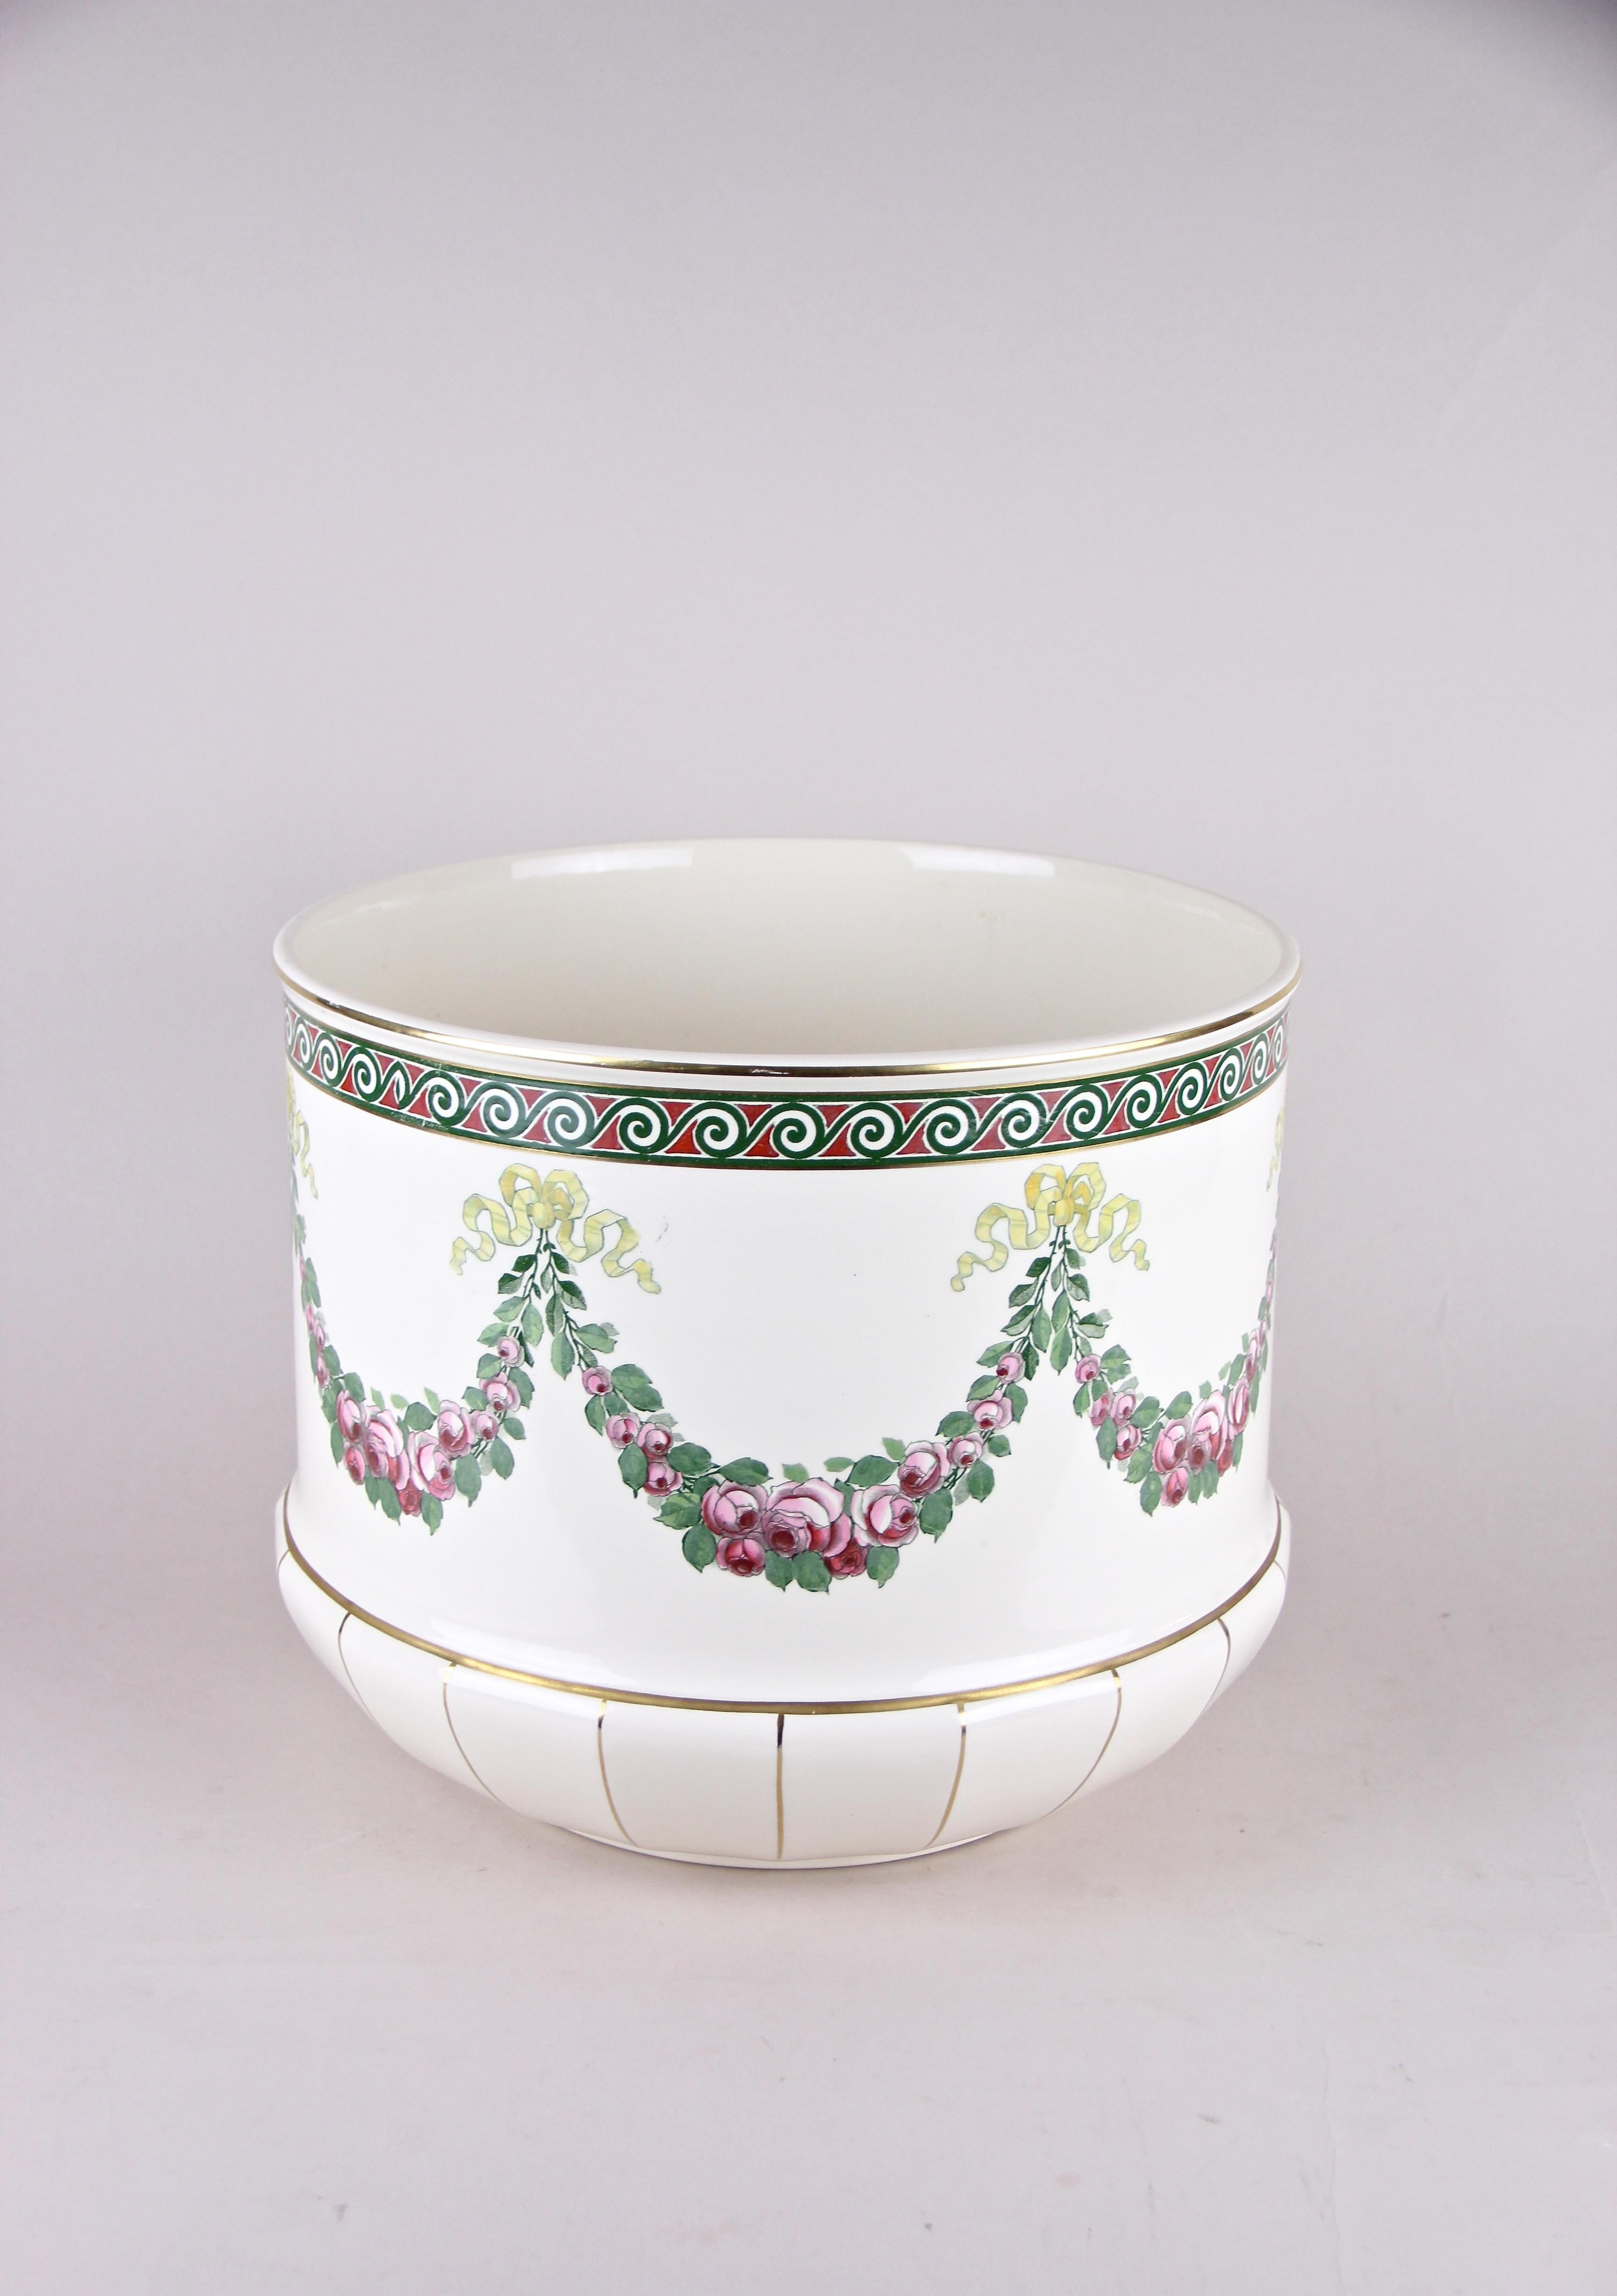 From the early 20th century comes this great cachepot from the world renown manufacture of Villeroy & Boch. A Fine large cachepot adorned by flower garlands surrounding the whole piece and Fine golden lines on the bottom. This item comes in perfect